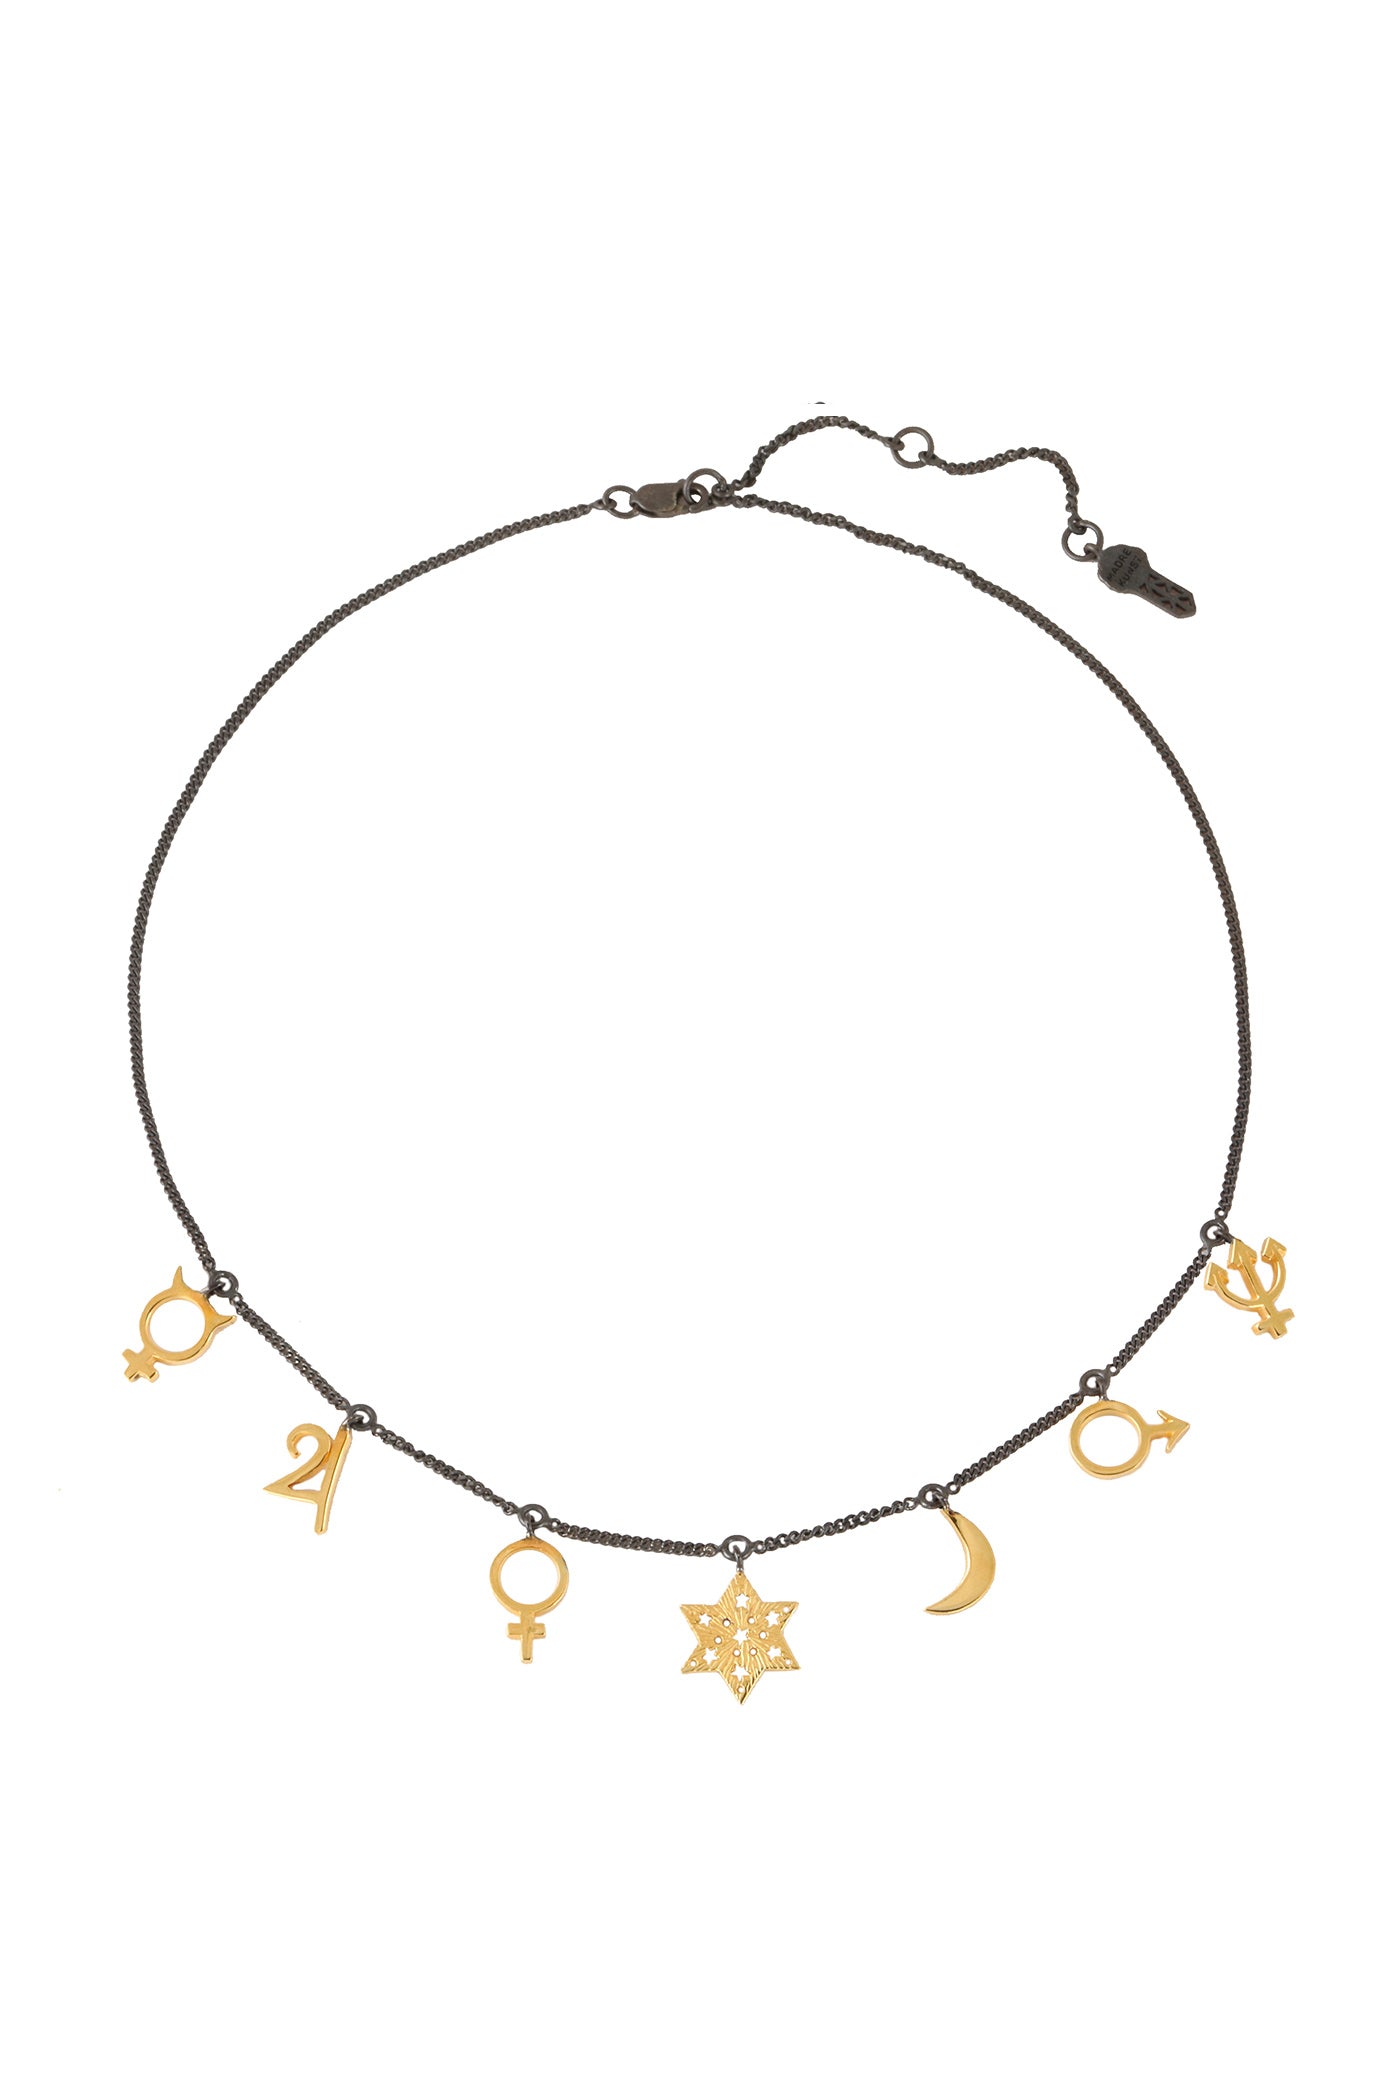 Heavenly princess choker. Silver, gold-plated, oxidized